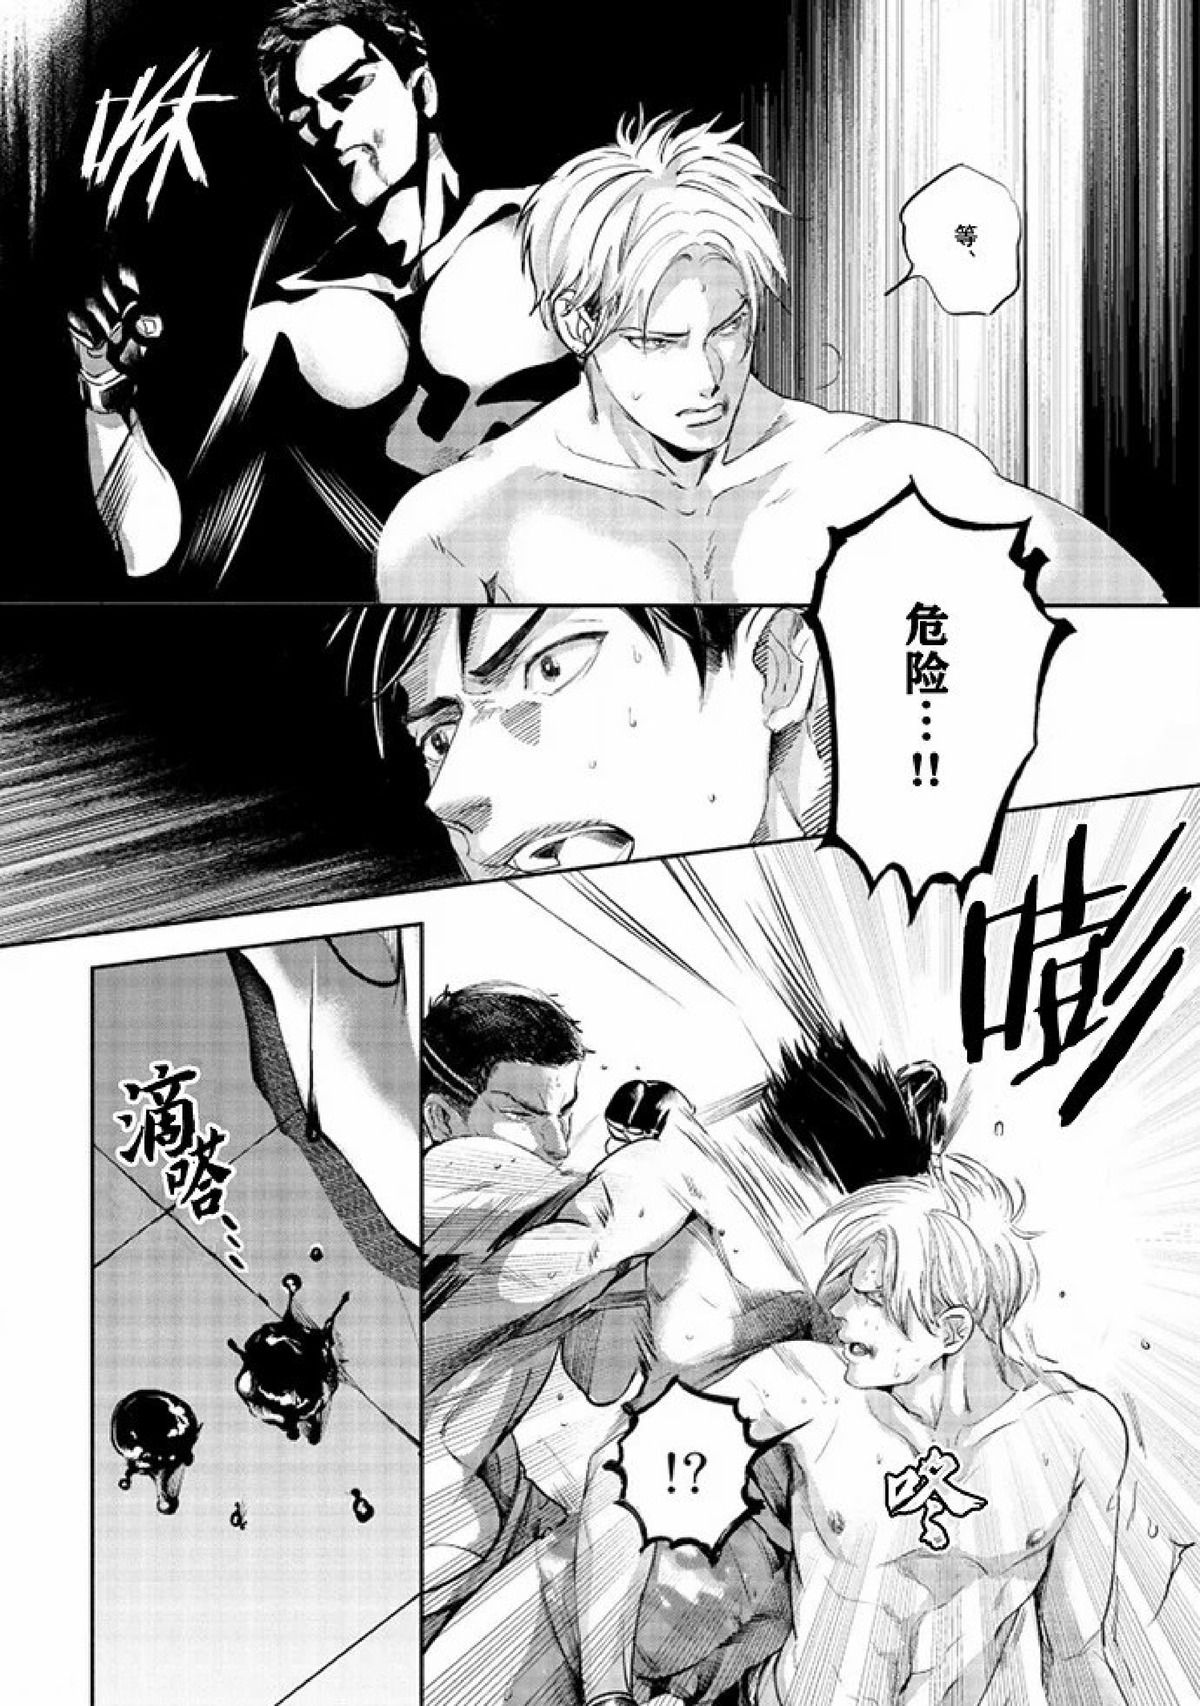 【Two sides of the same coin[耽美]】漫画-（上卷01-02）章节漫画下拉式图片-68.jpg